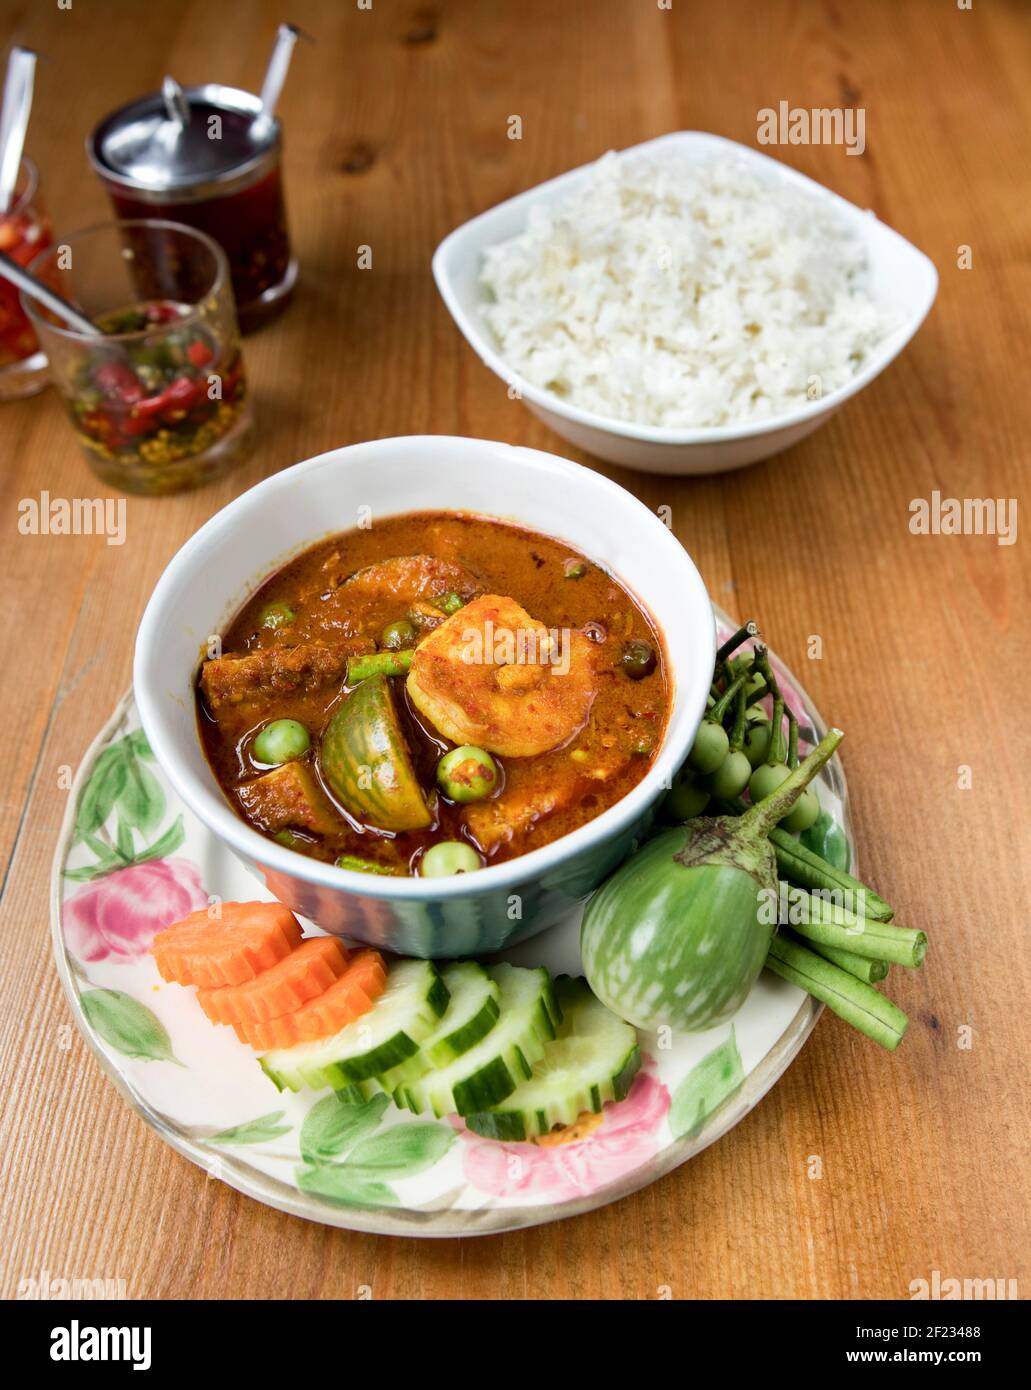 101 Thai Kitchen Pic Shows:  Salted Fish Guts Curry Stock Photo